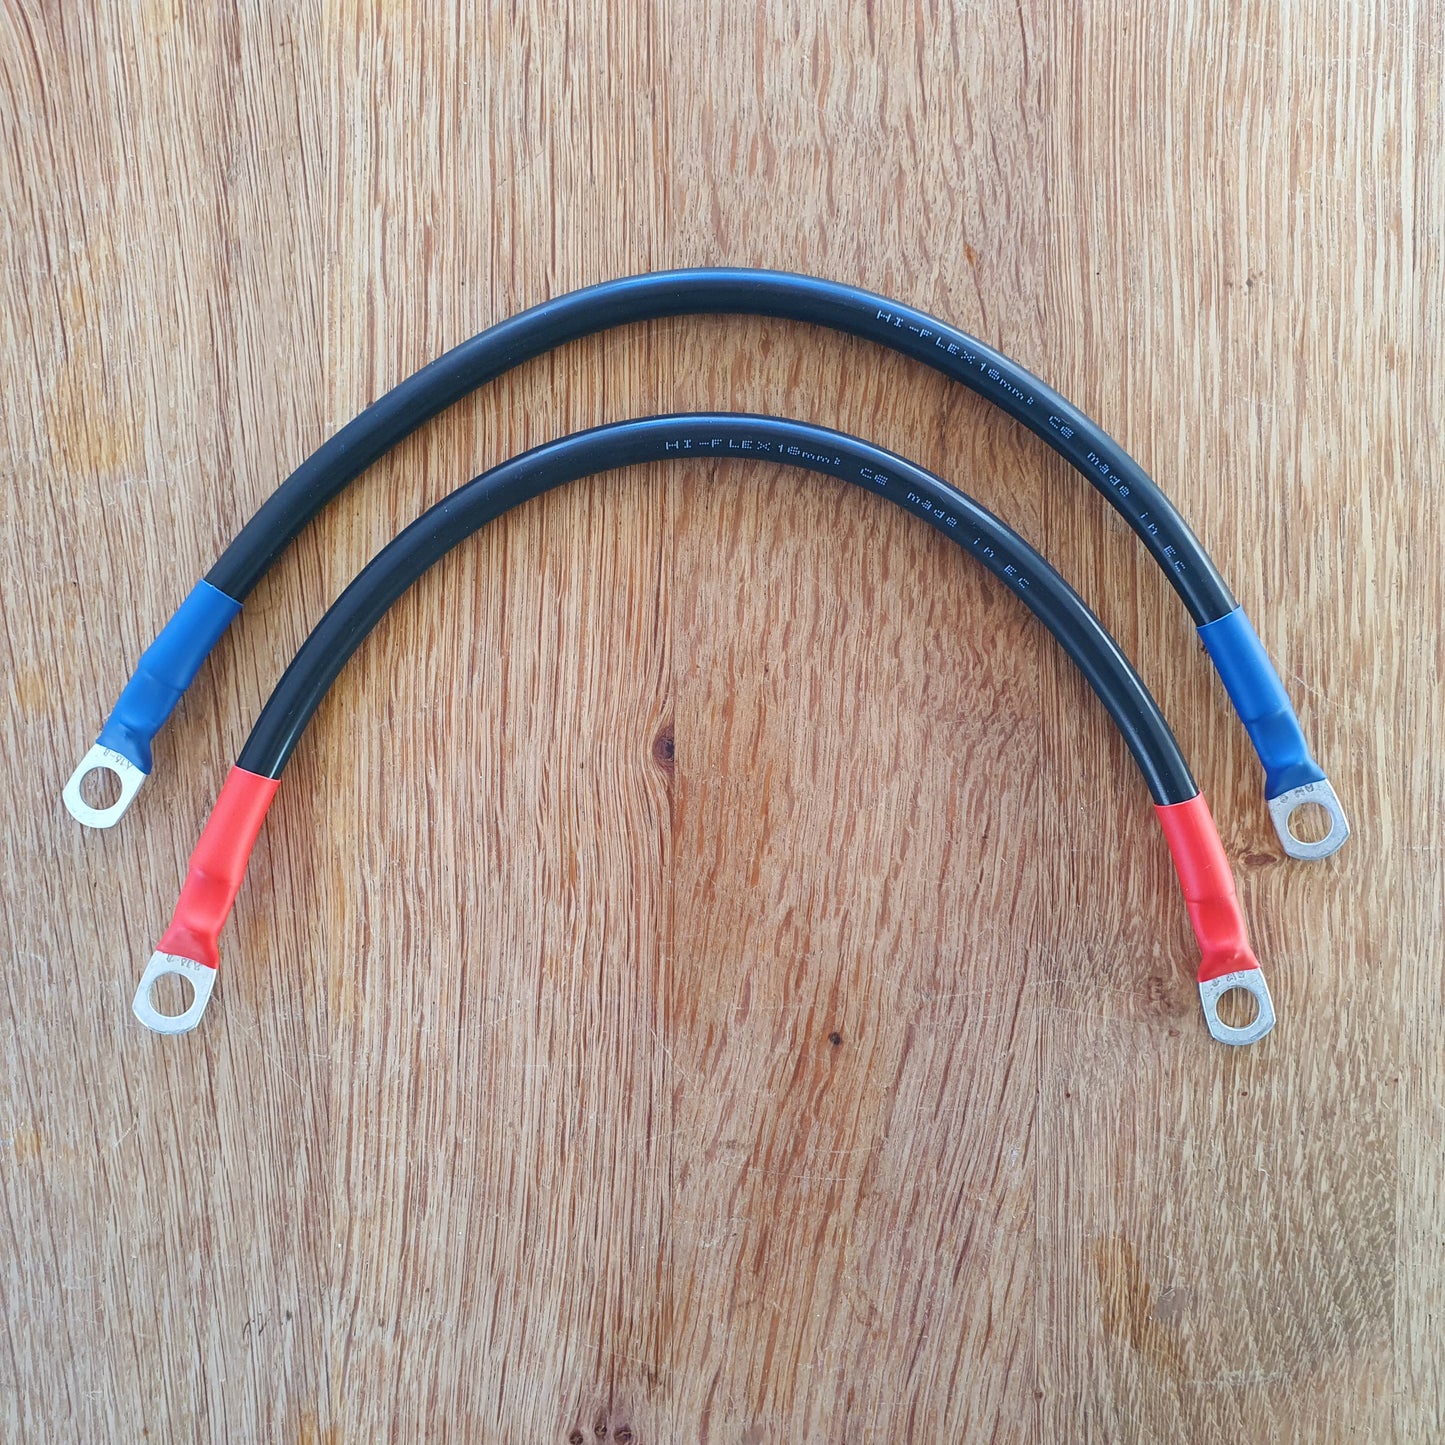 Leisure Battery Power Cables 16mm2